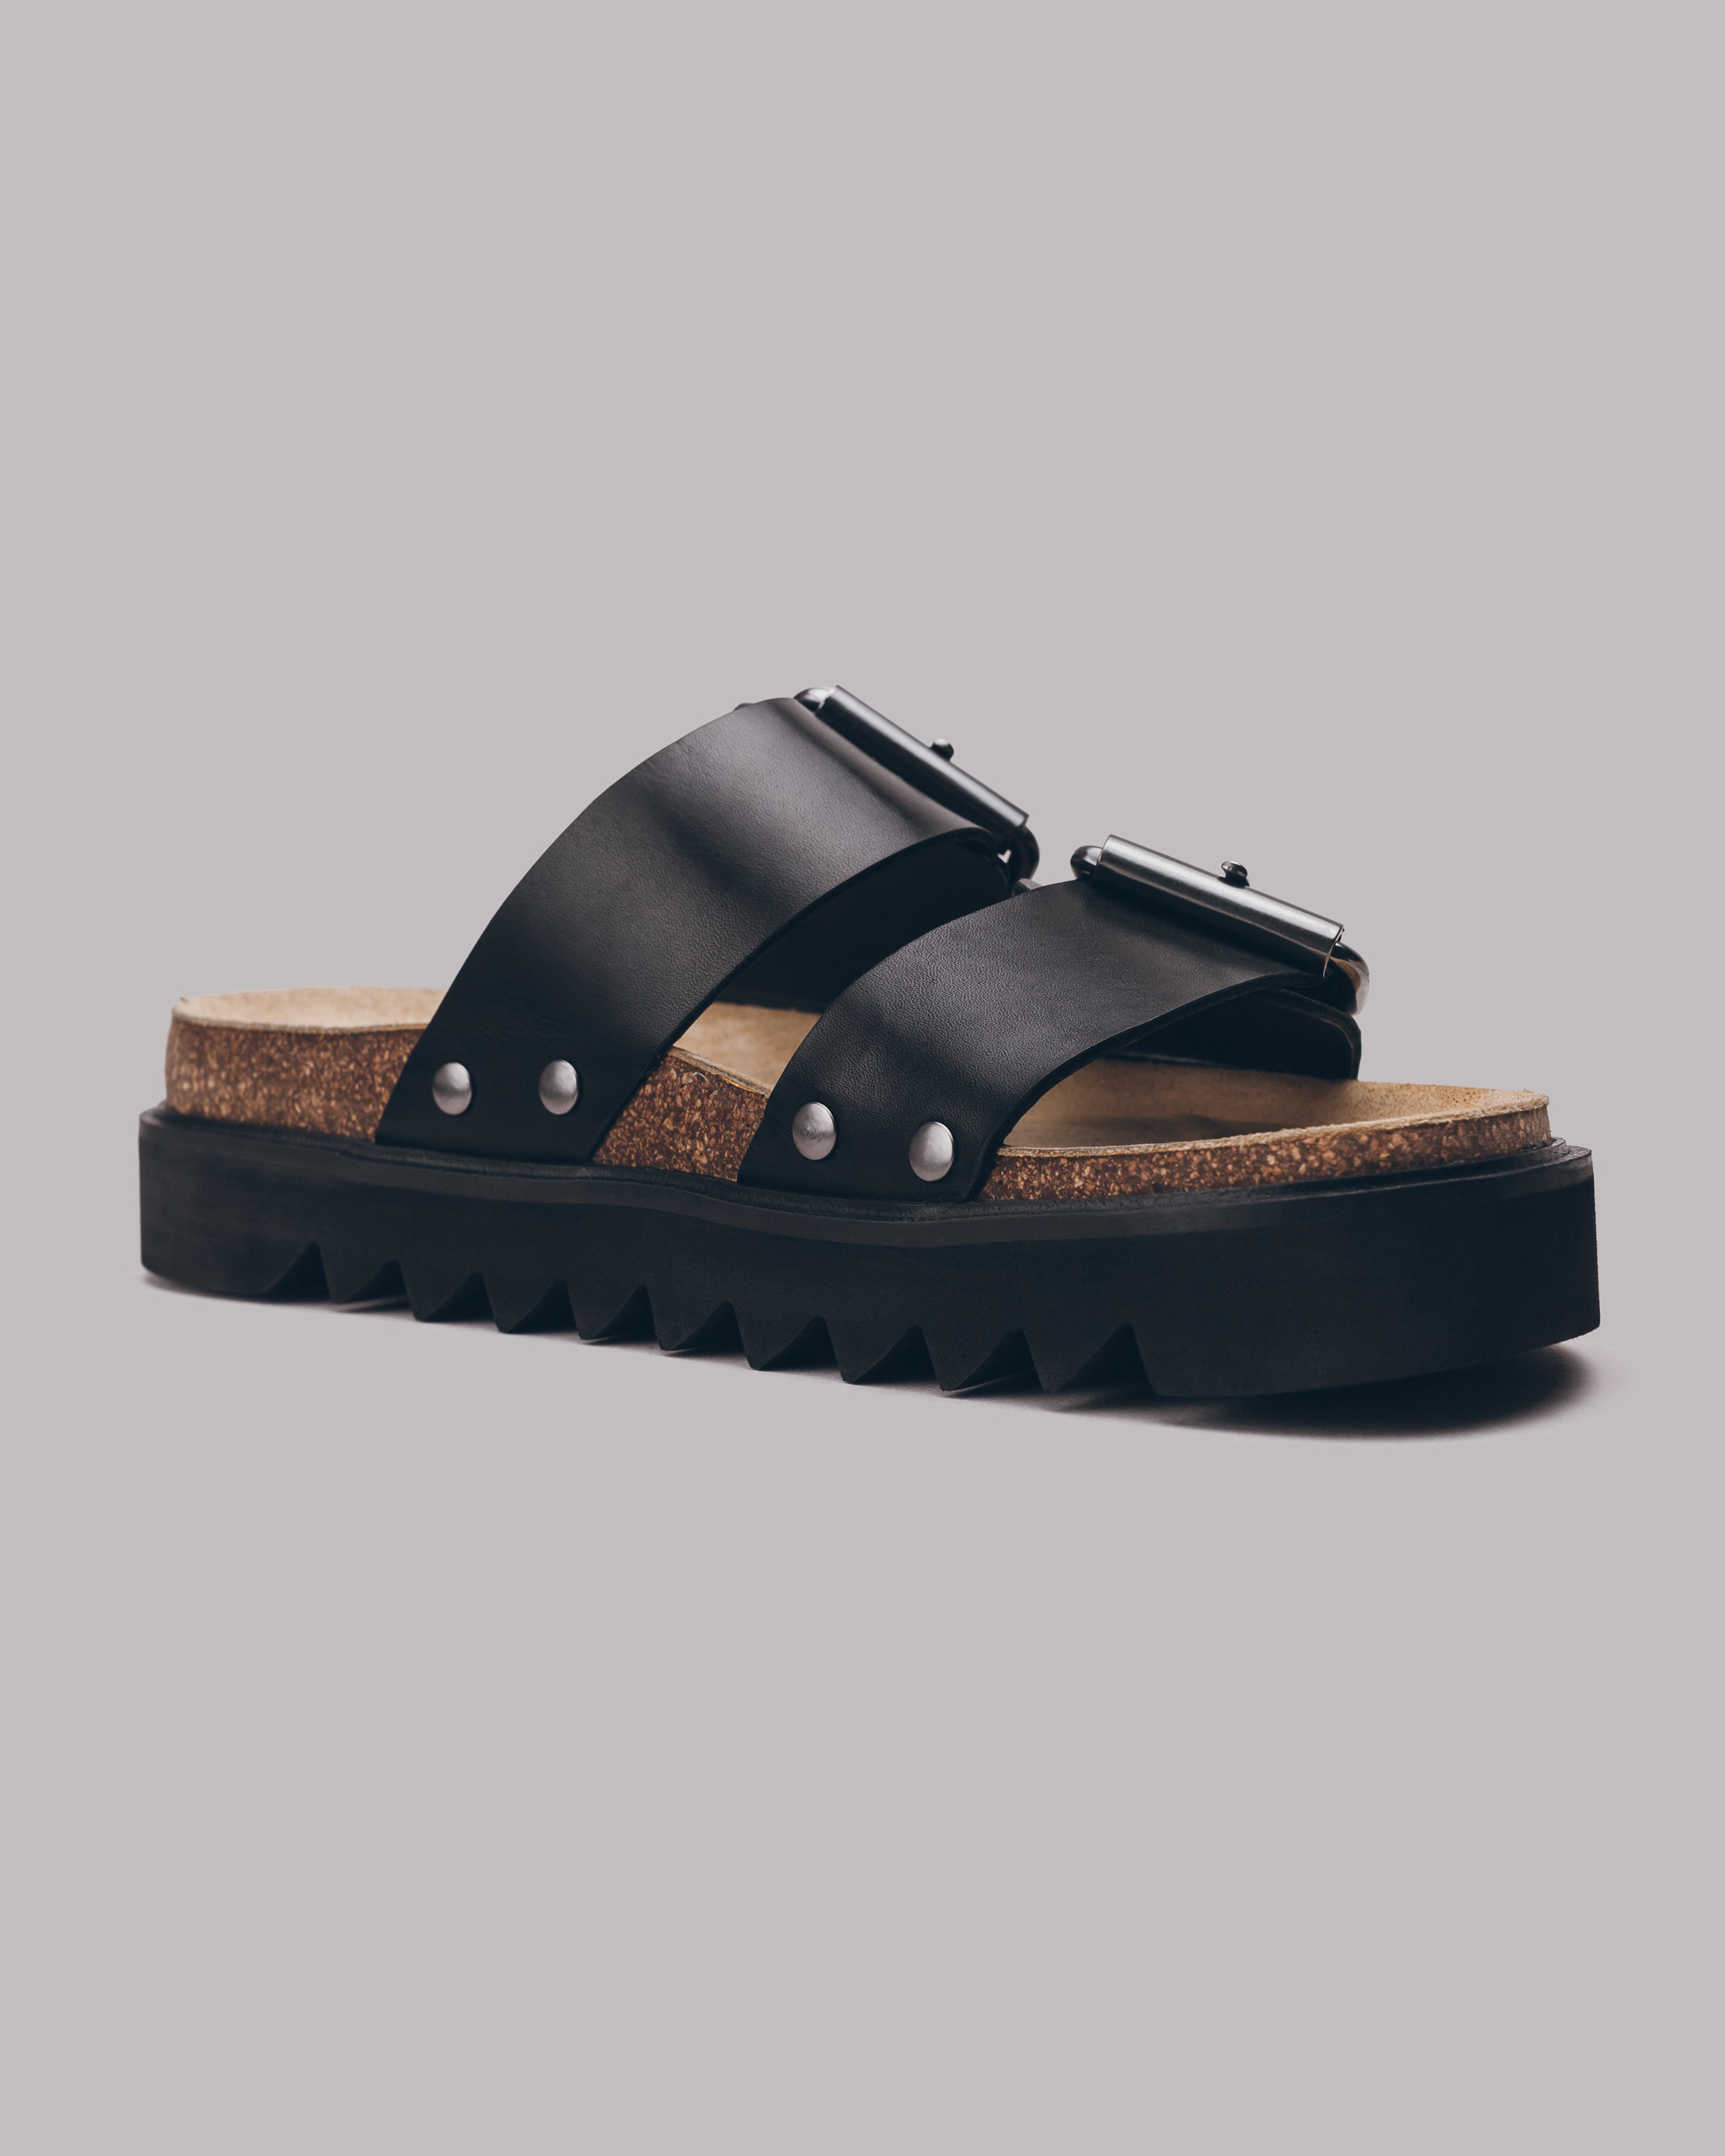 The Black Leather Buckle Sandals